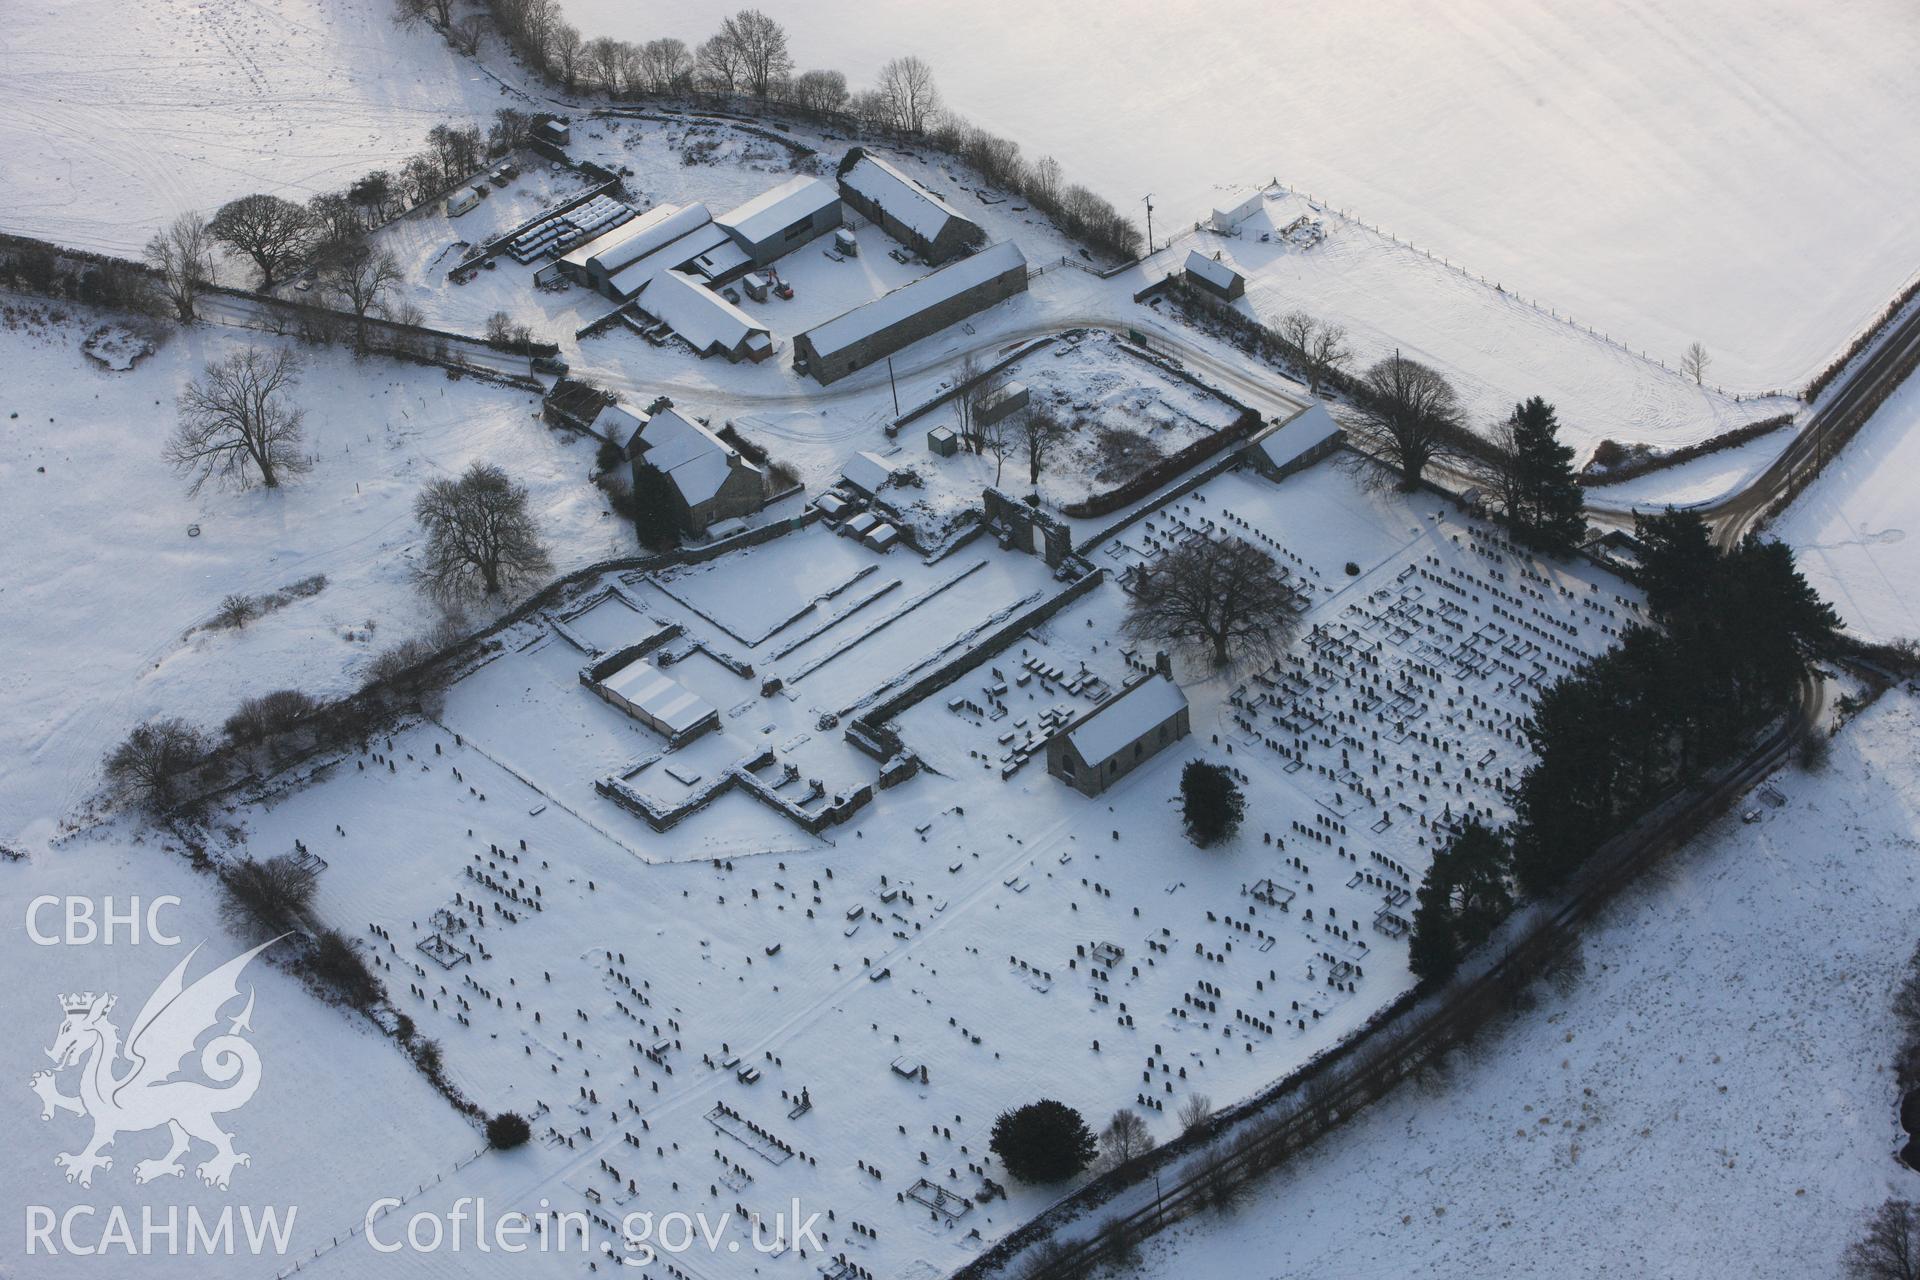 RCAHMW colour oblique aerial photograph of Strata Florida Abbey under snow, by Toby Driver, 02/12/2010.